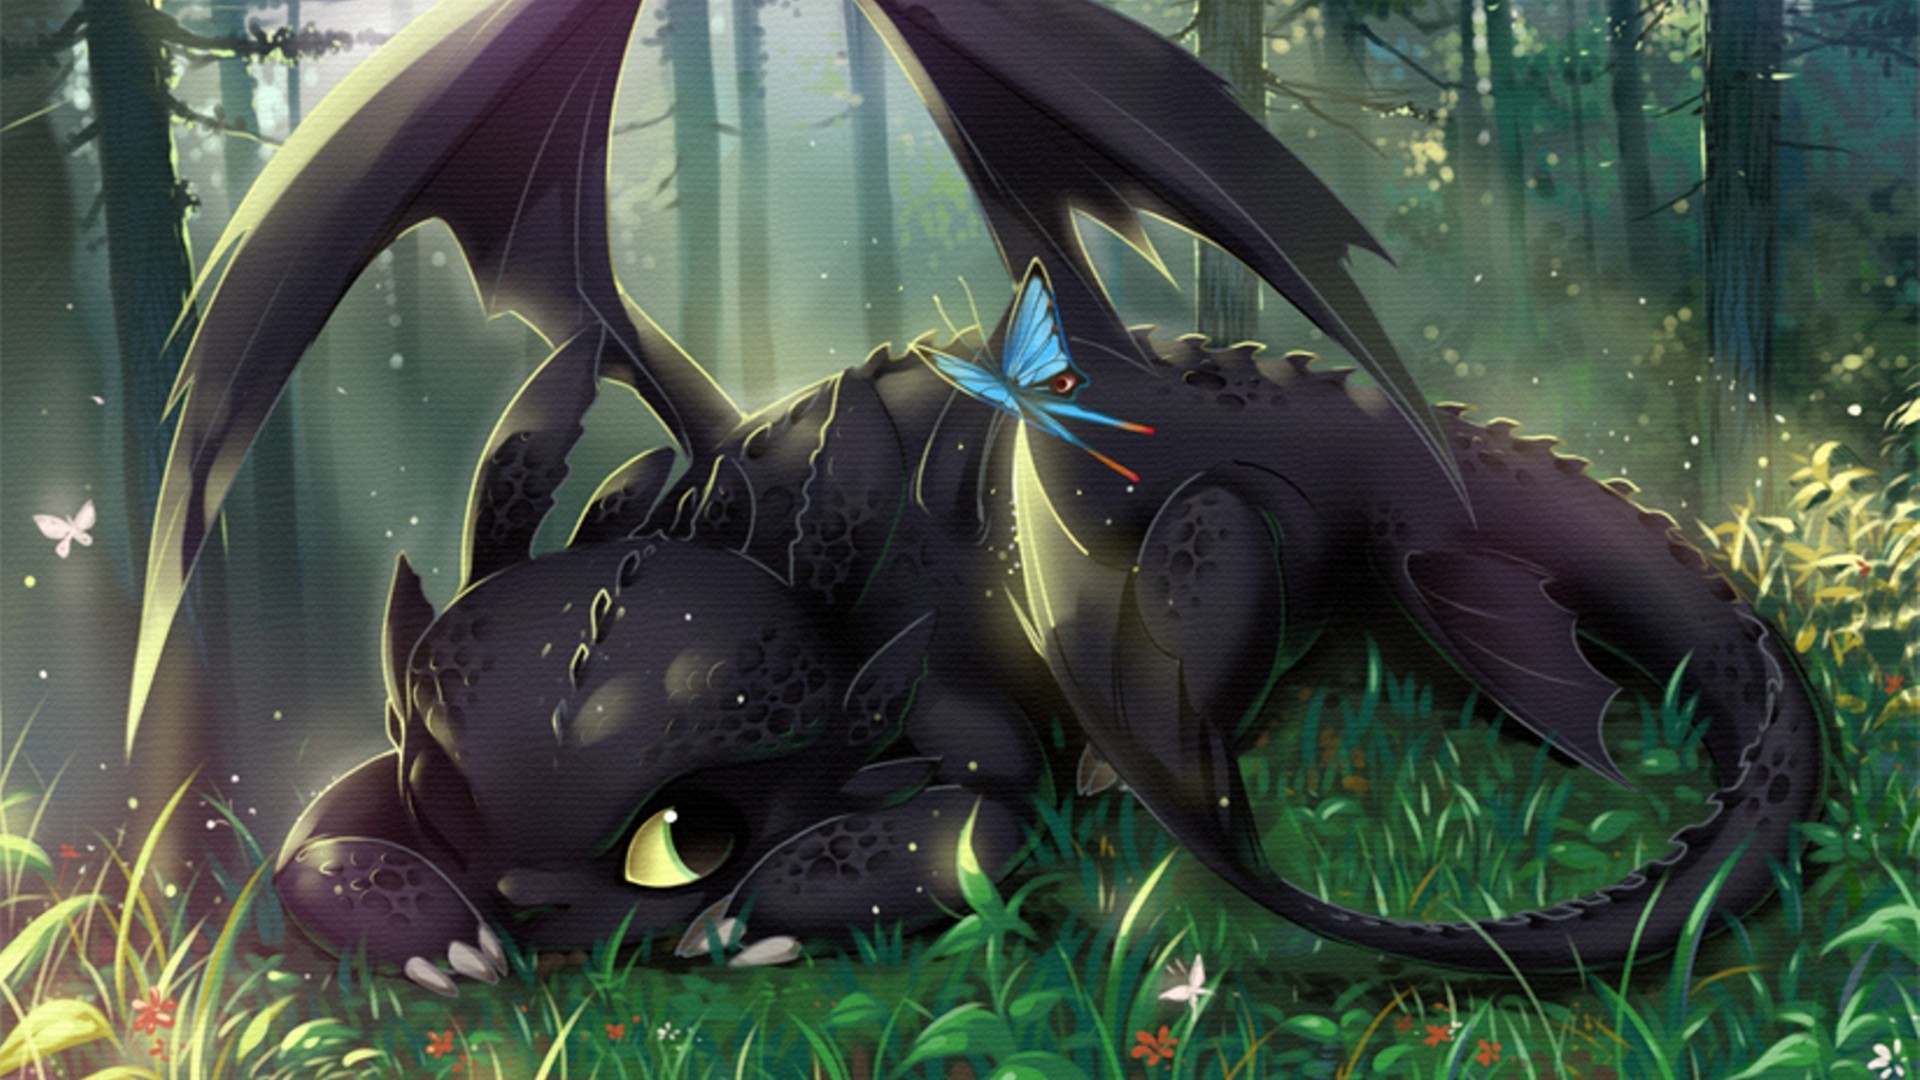 General 1920x1080 Toothless movies animated movies dragon butterfly creature